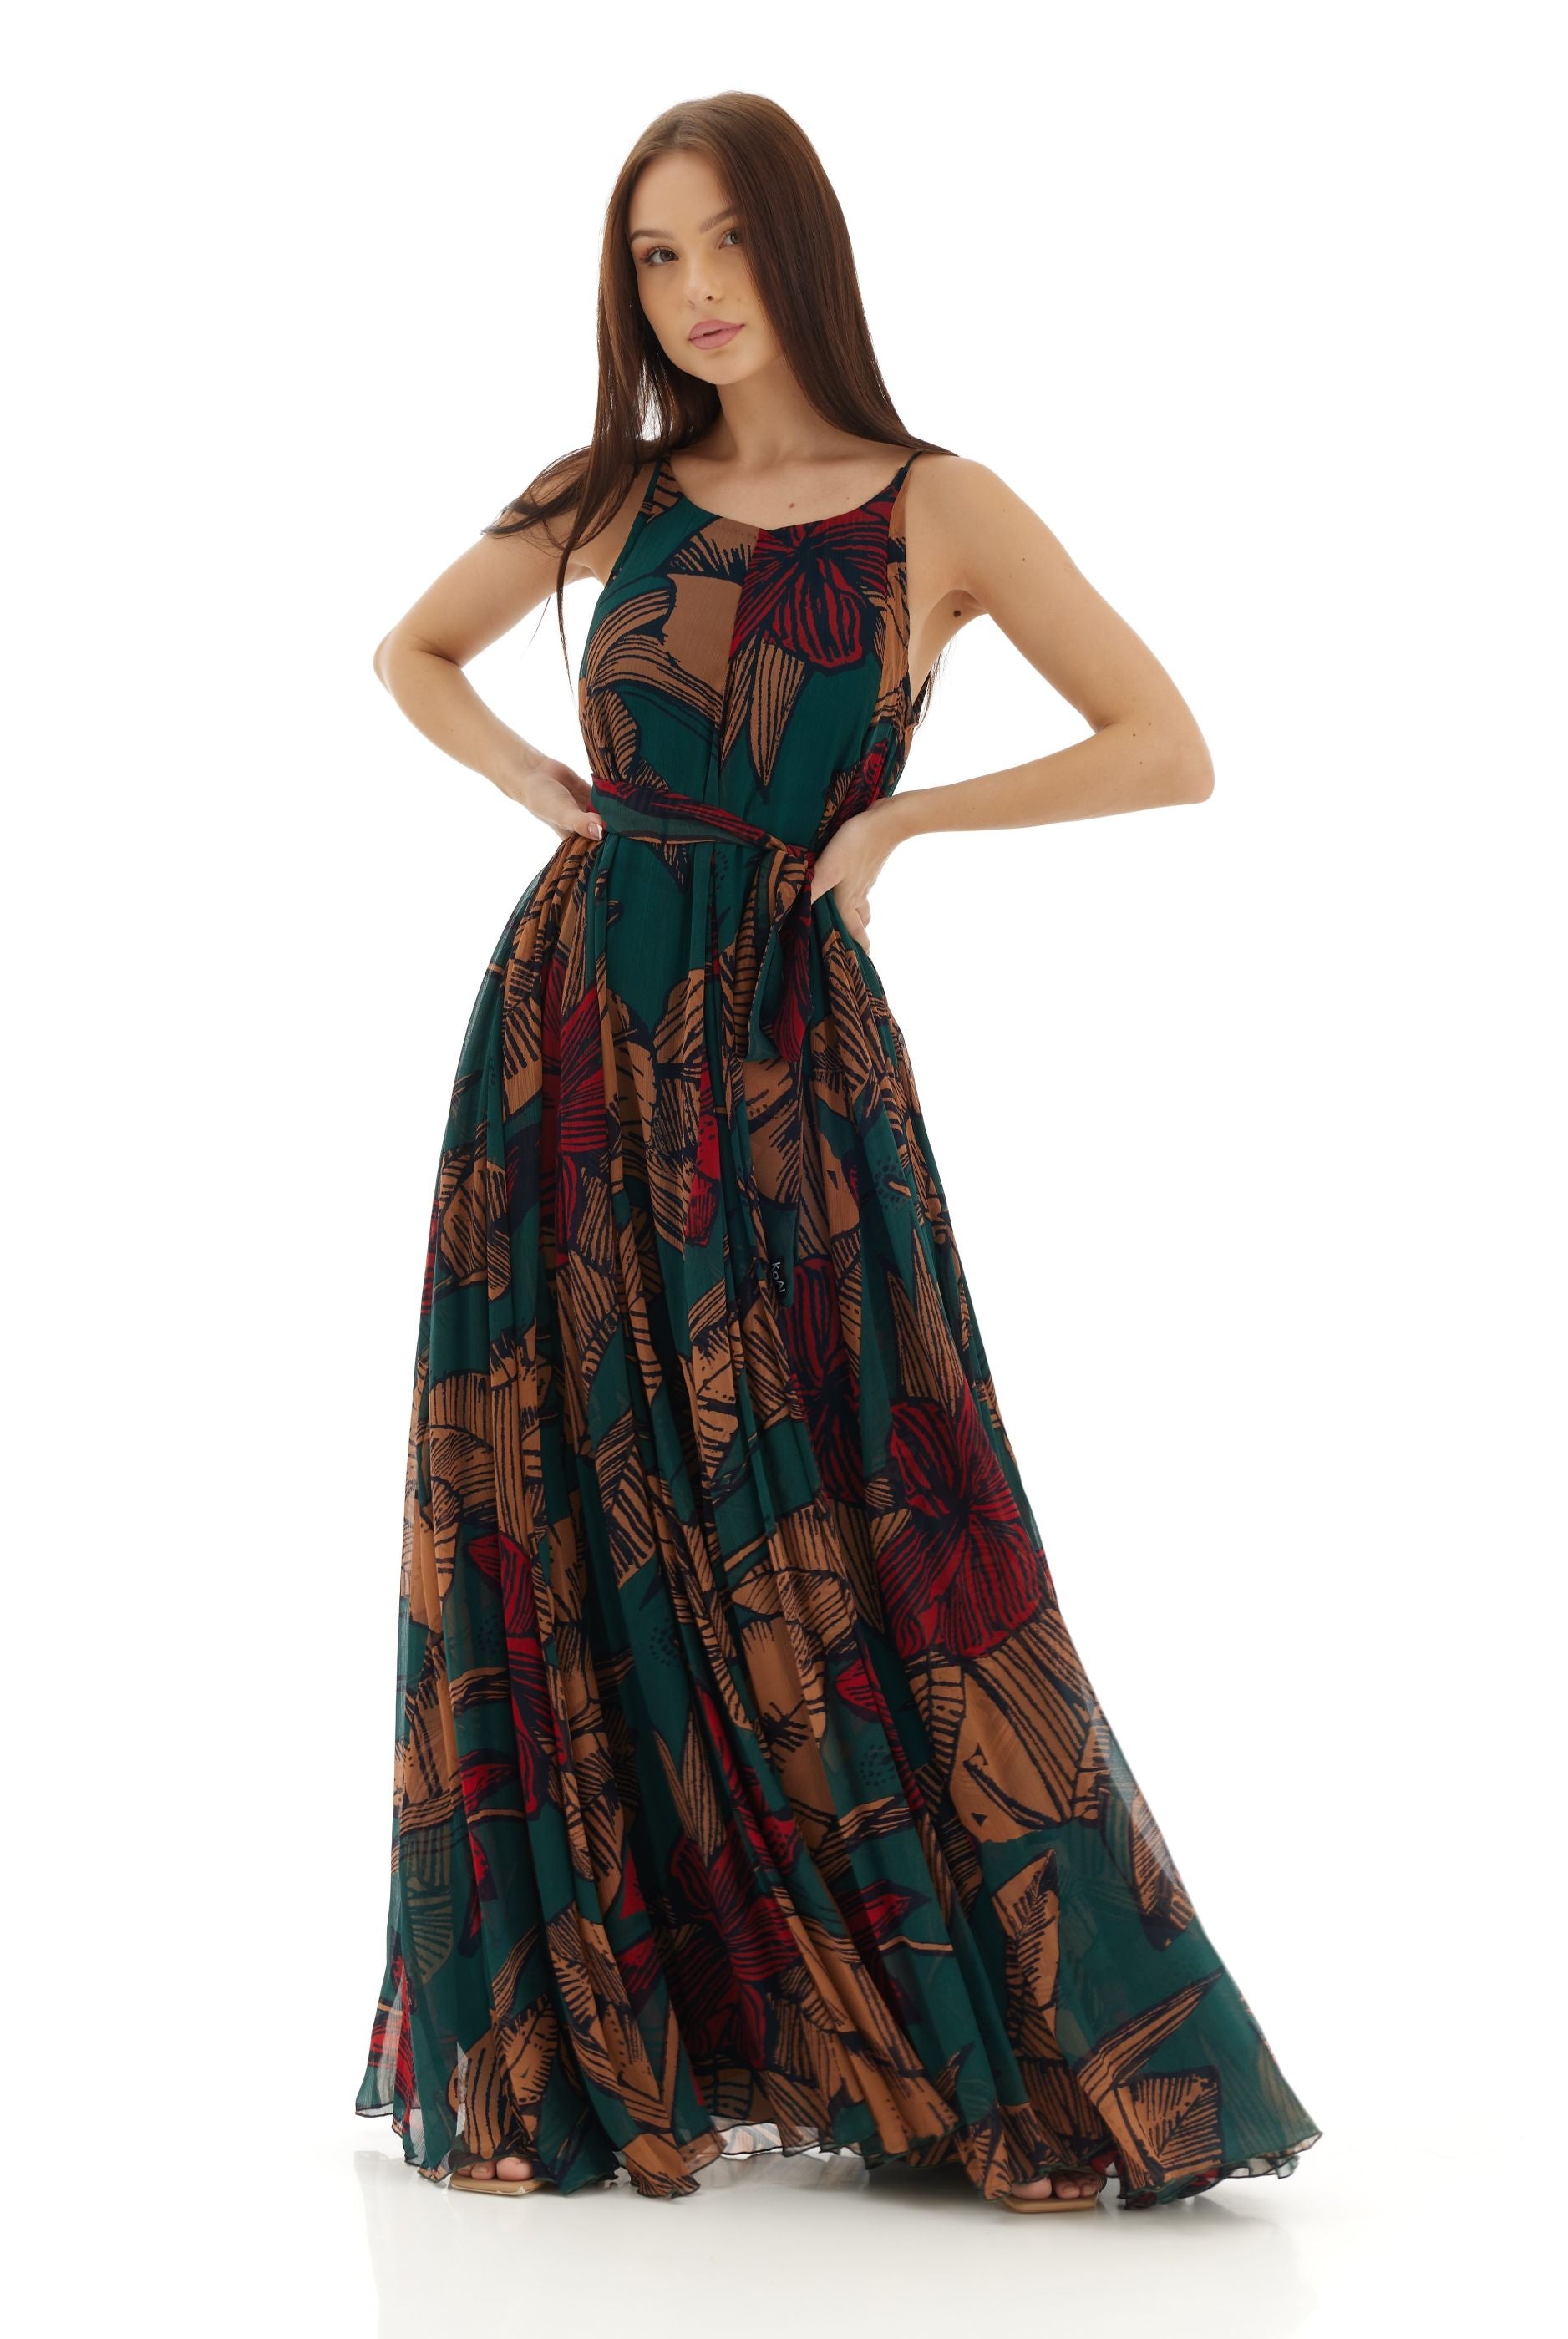 BMD59 - Patterned Red and Green Bridesmaid Dresses | Iludio